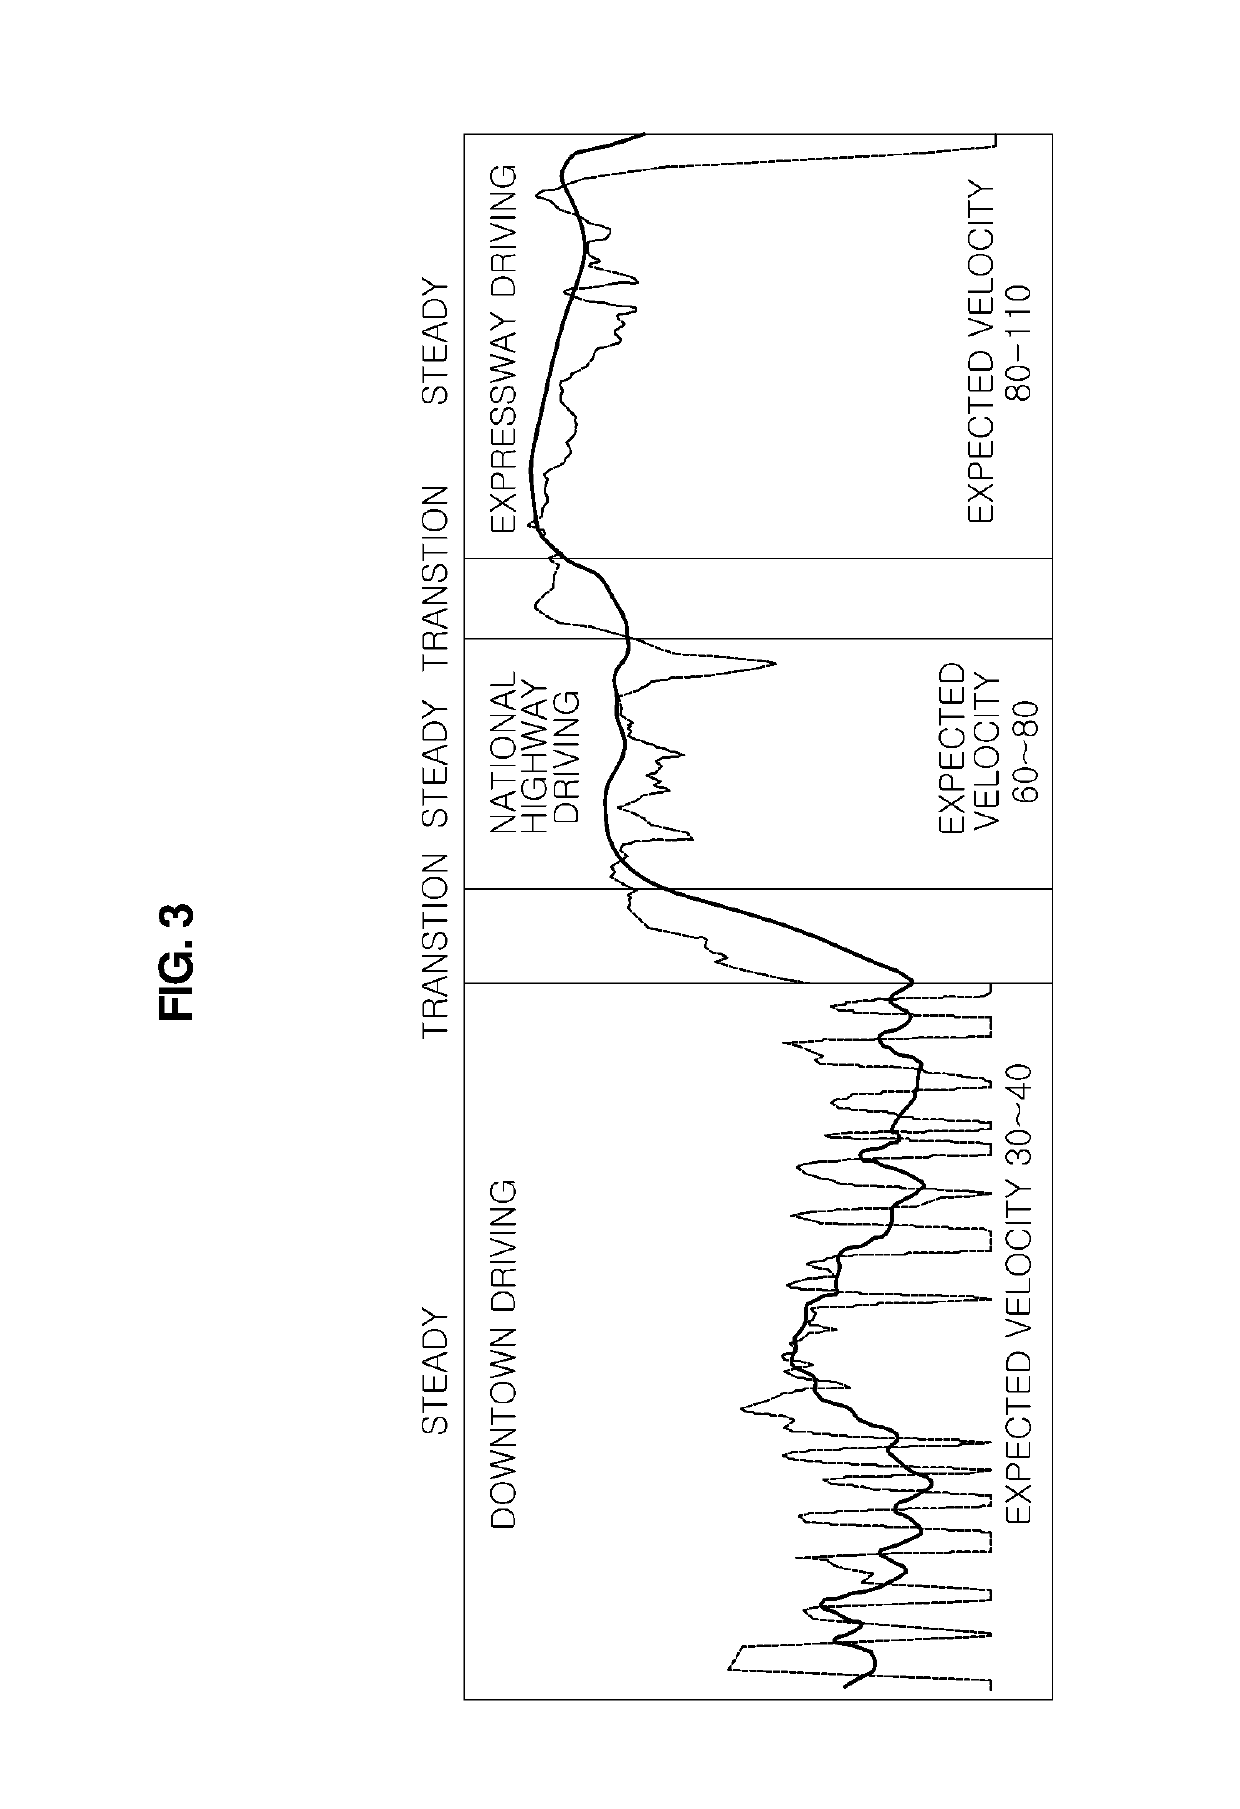 Driving control method for hybrid vehicle